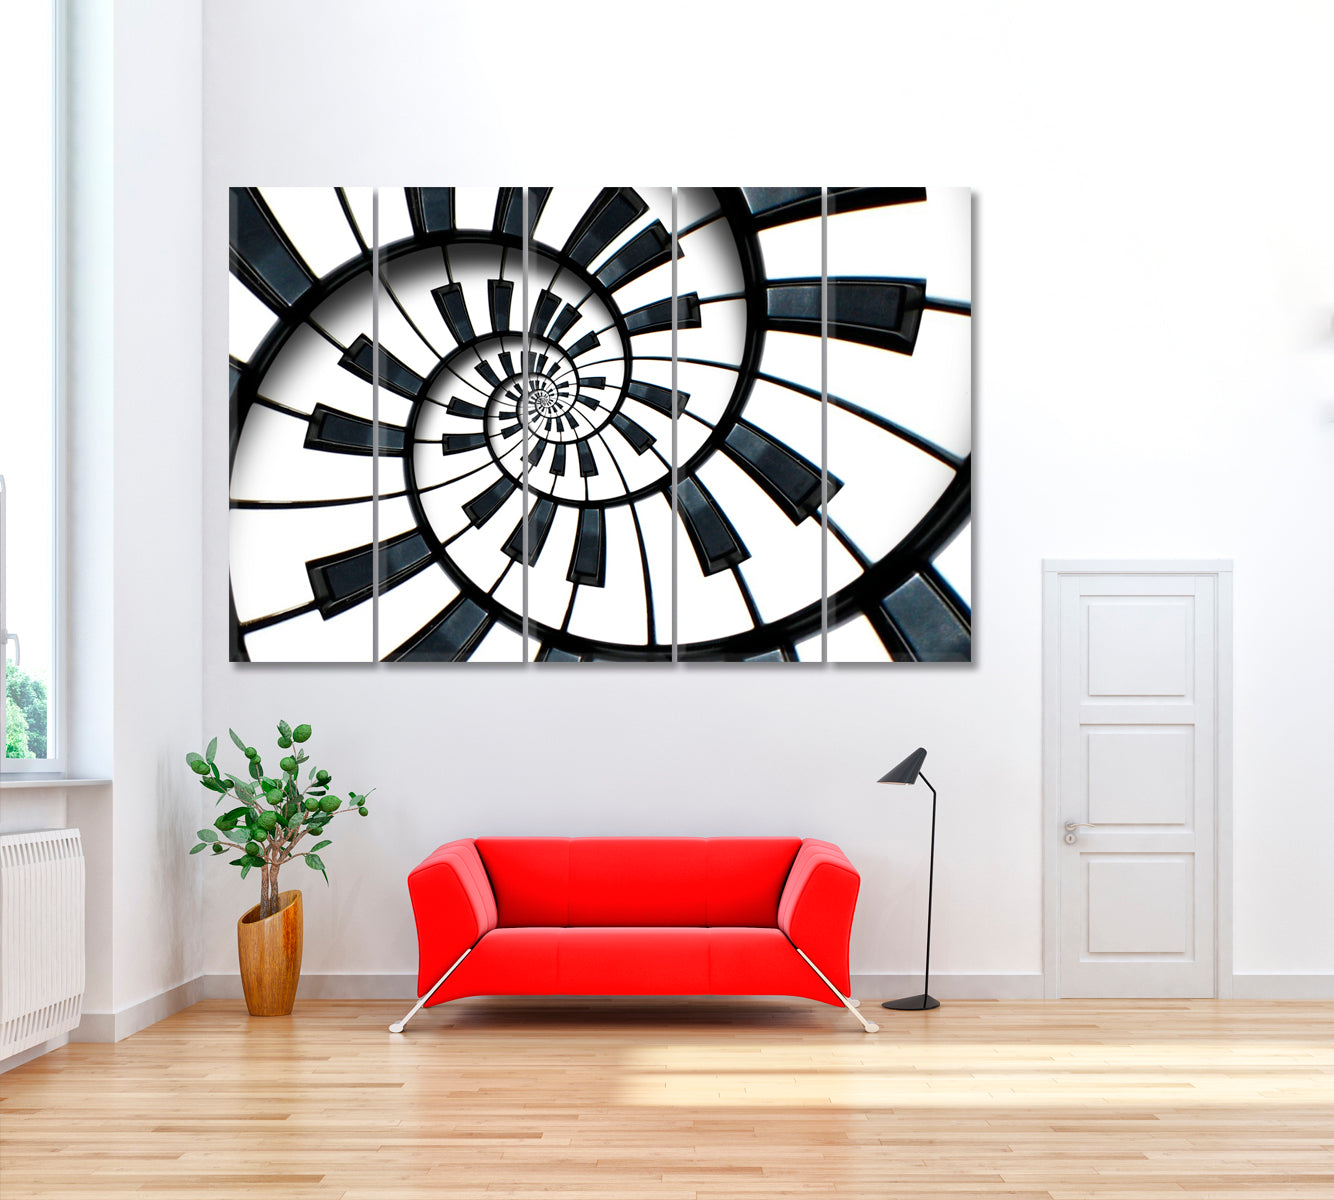 Abstract Piano Keyboard Spiral Canvas Print ArtLexy 5 Panels 36"x24" inches 